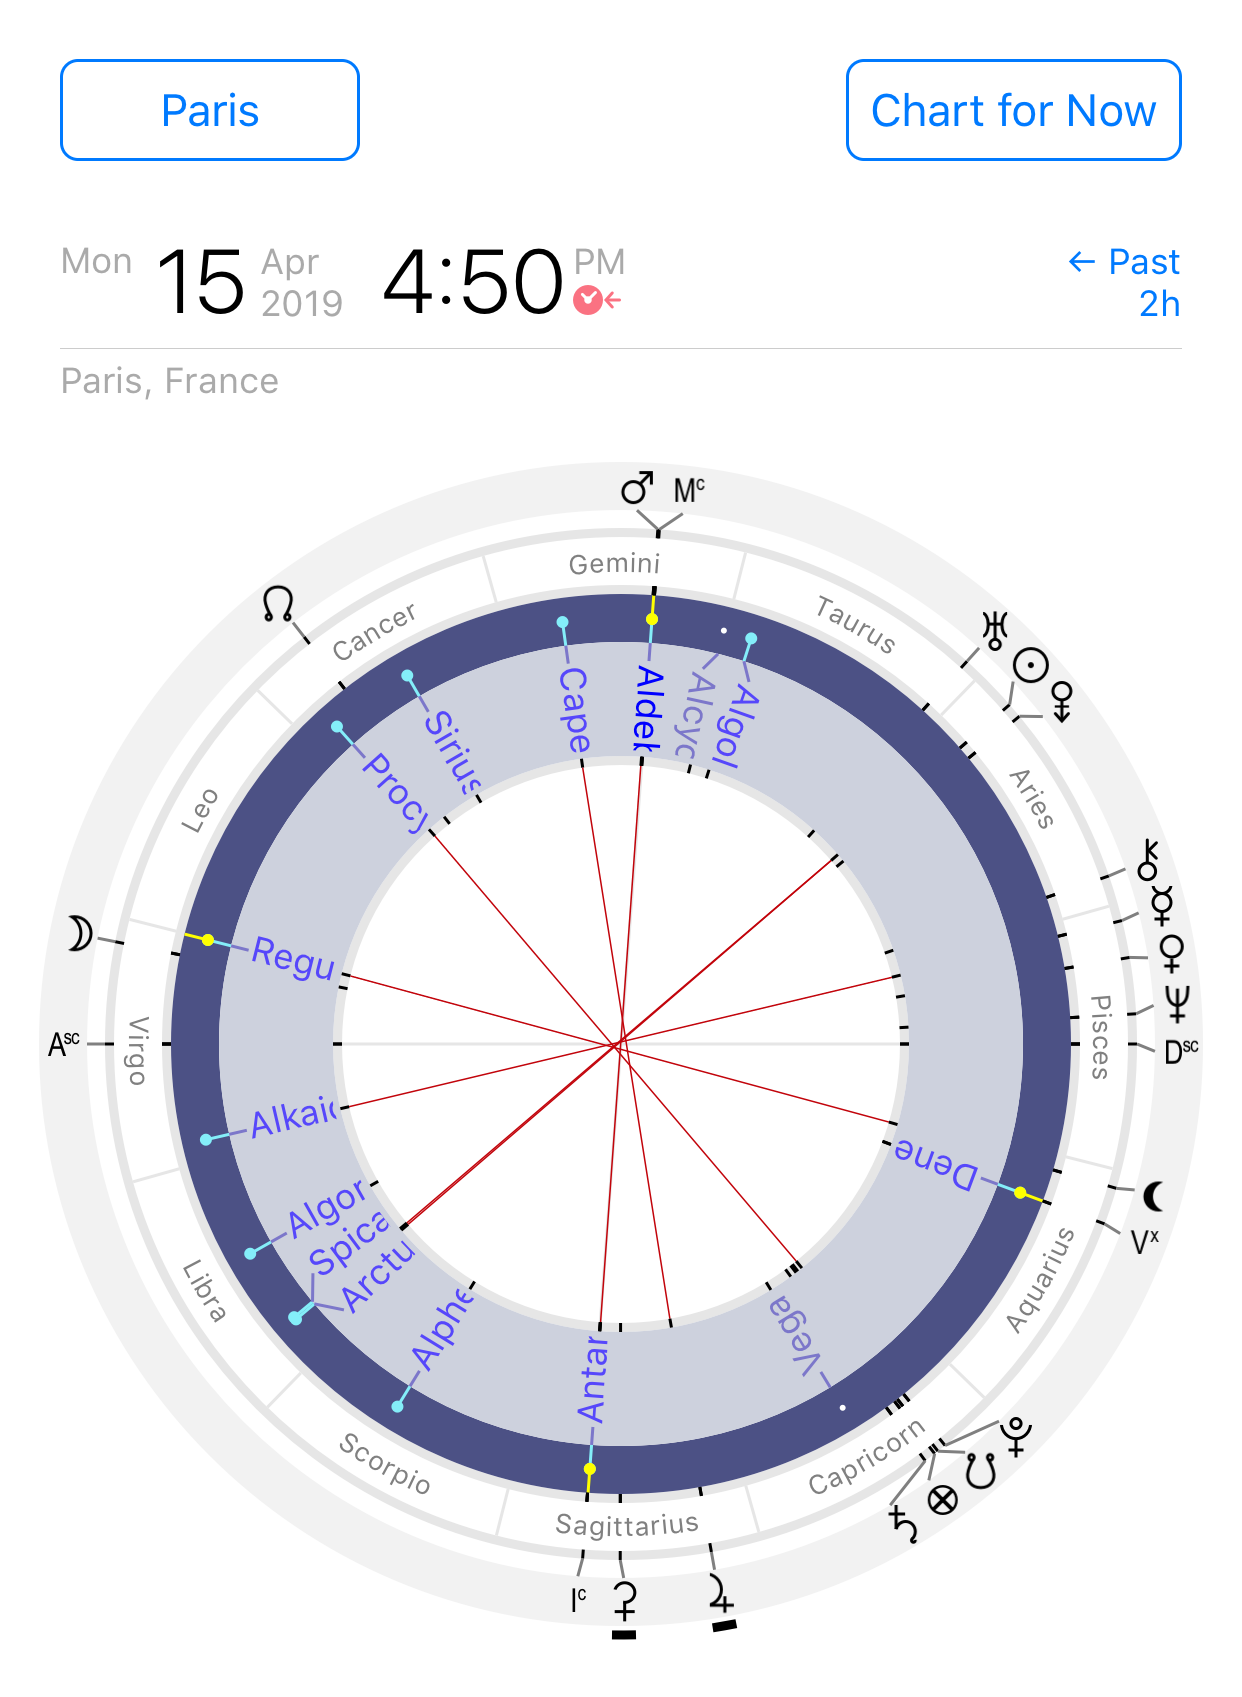 Astrological chart of the fixed stars aspects for Notre-Dame Cathedral fire of 15 April 2019, 16:50, two hours before fire reported